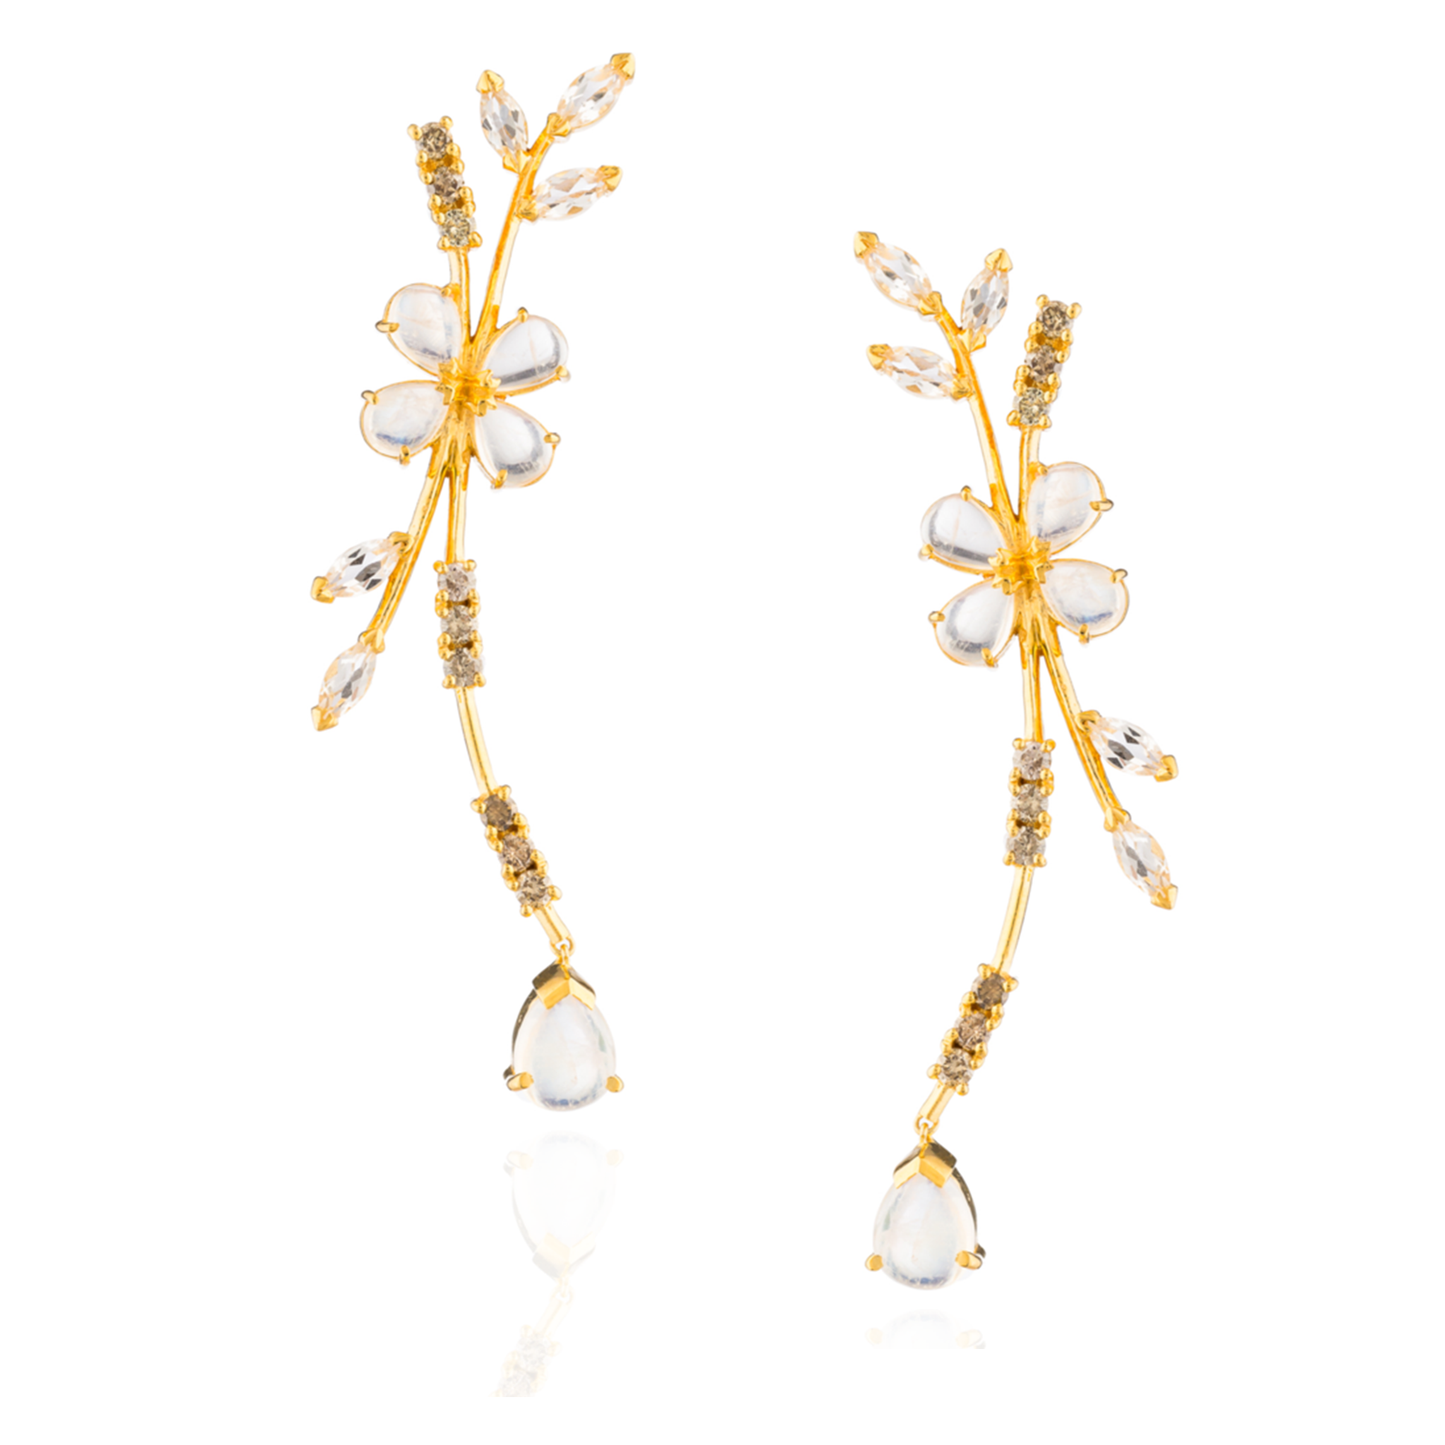 925 Silver Earrings Plated in 18K Yellow Gold with Moonstone, Cognac Diamonds & Crystals